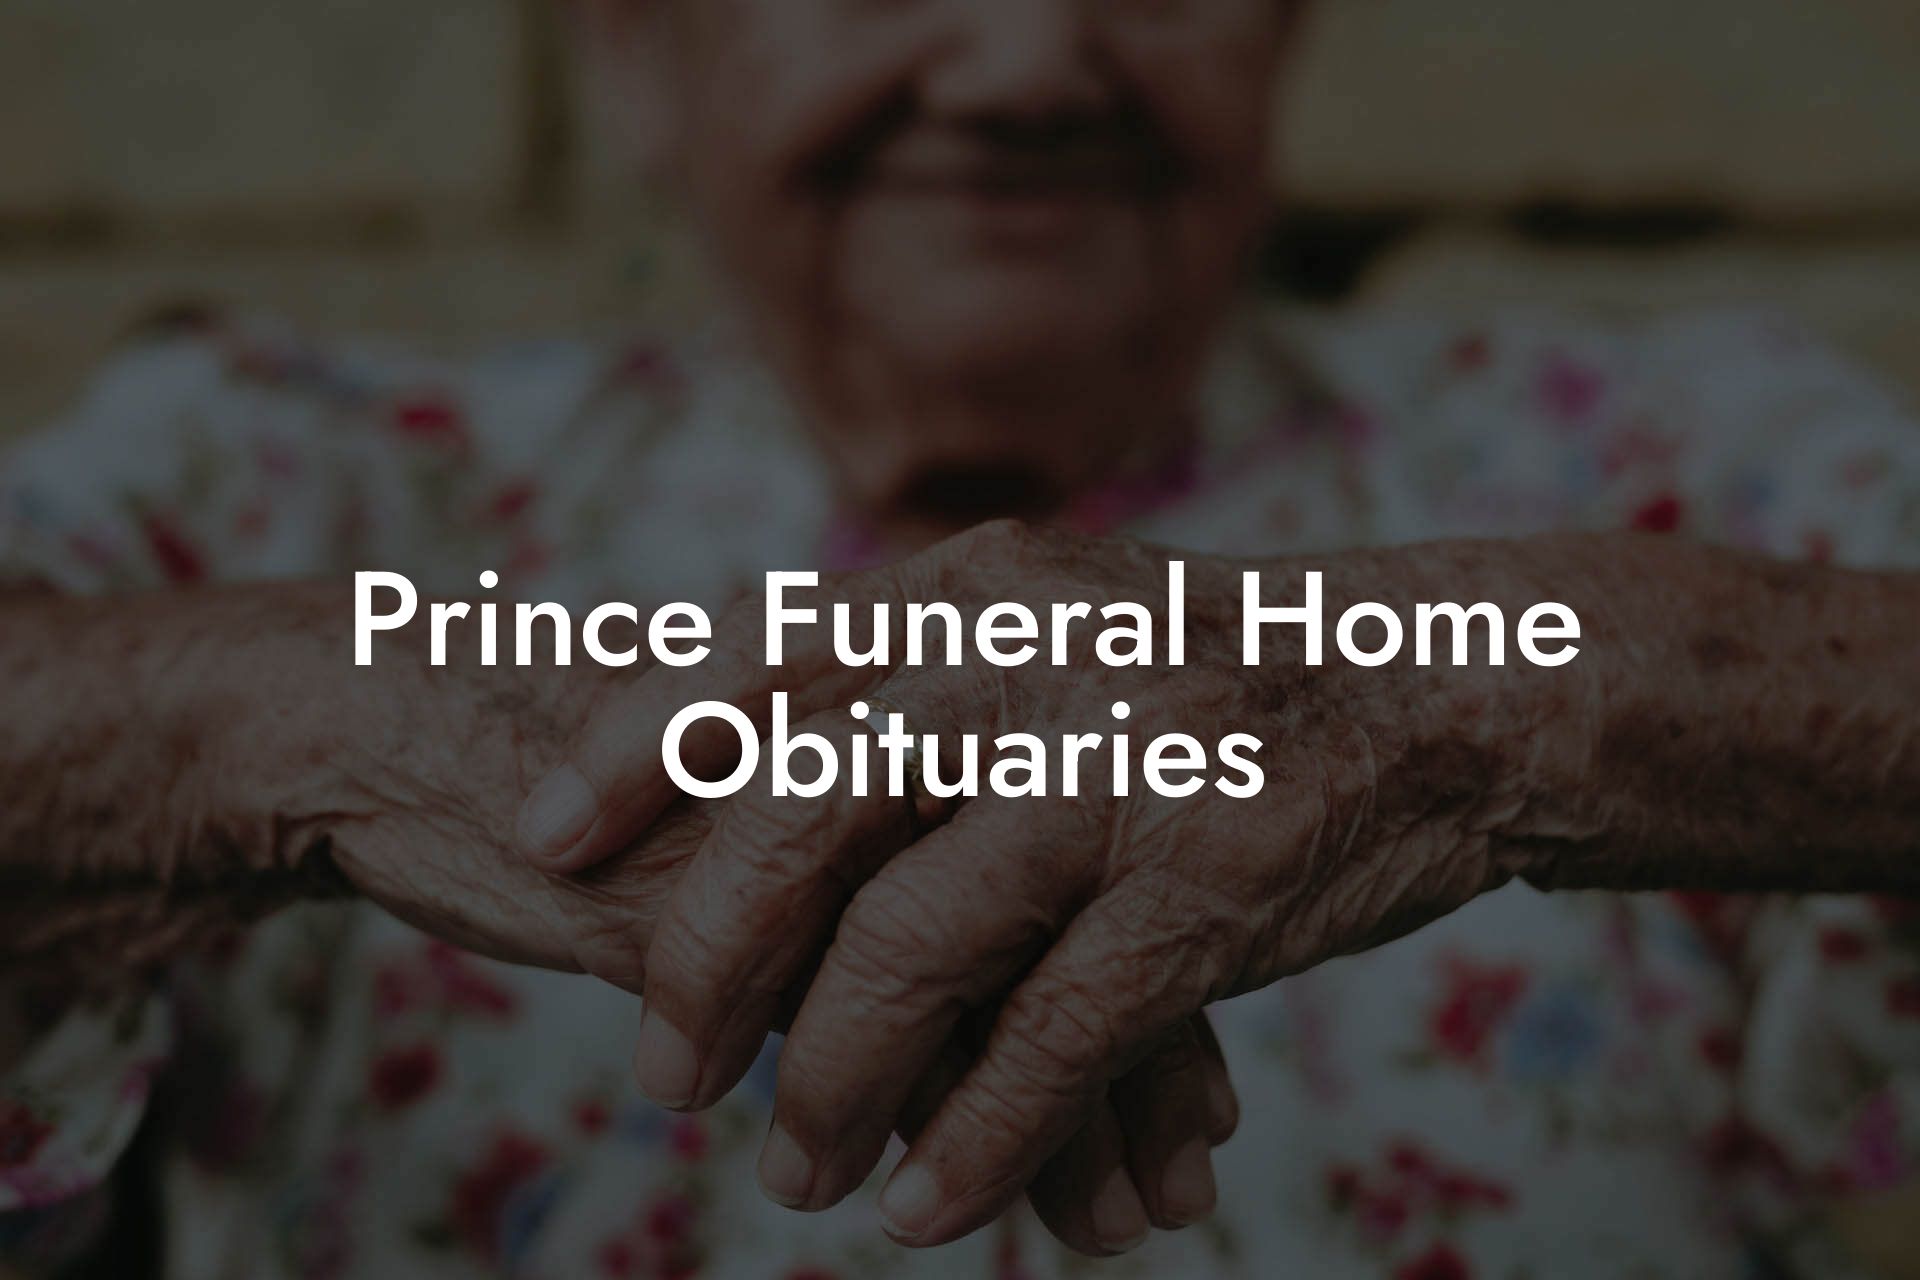 Prince Funeral Home Obituaries